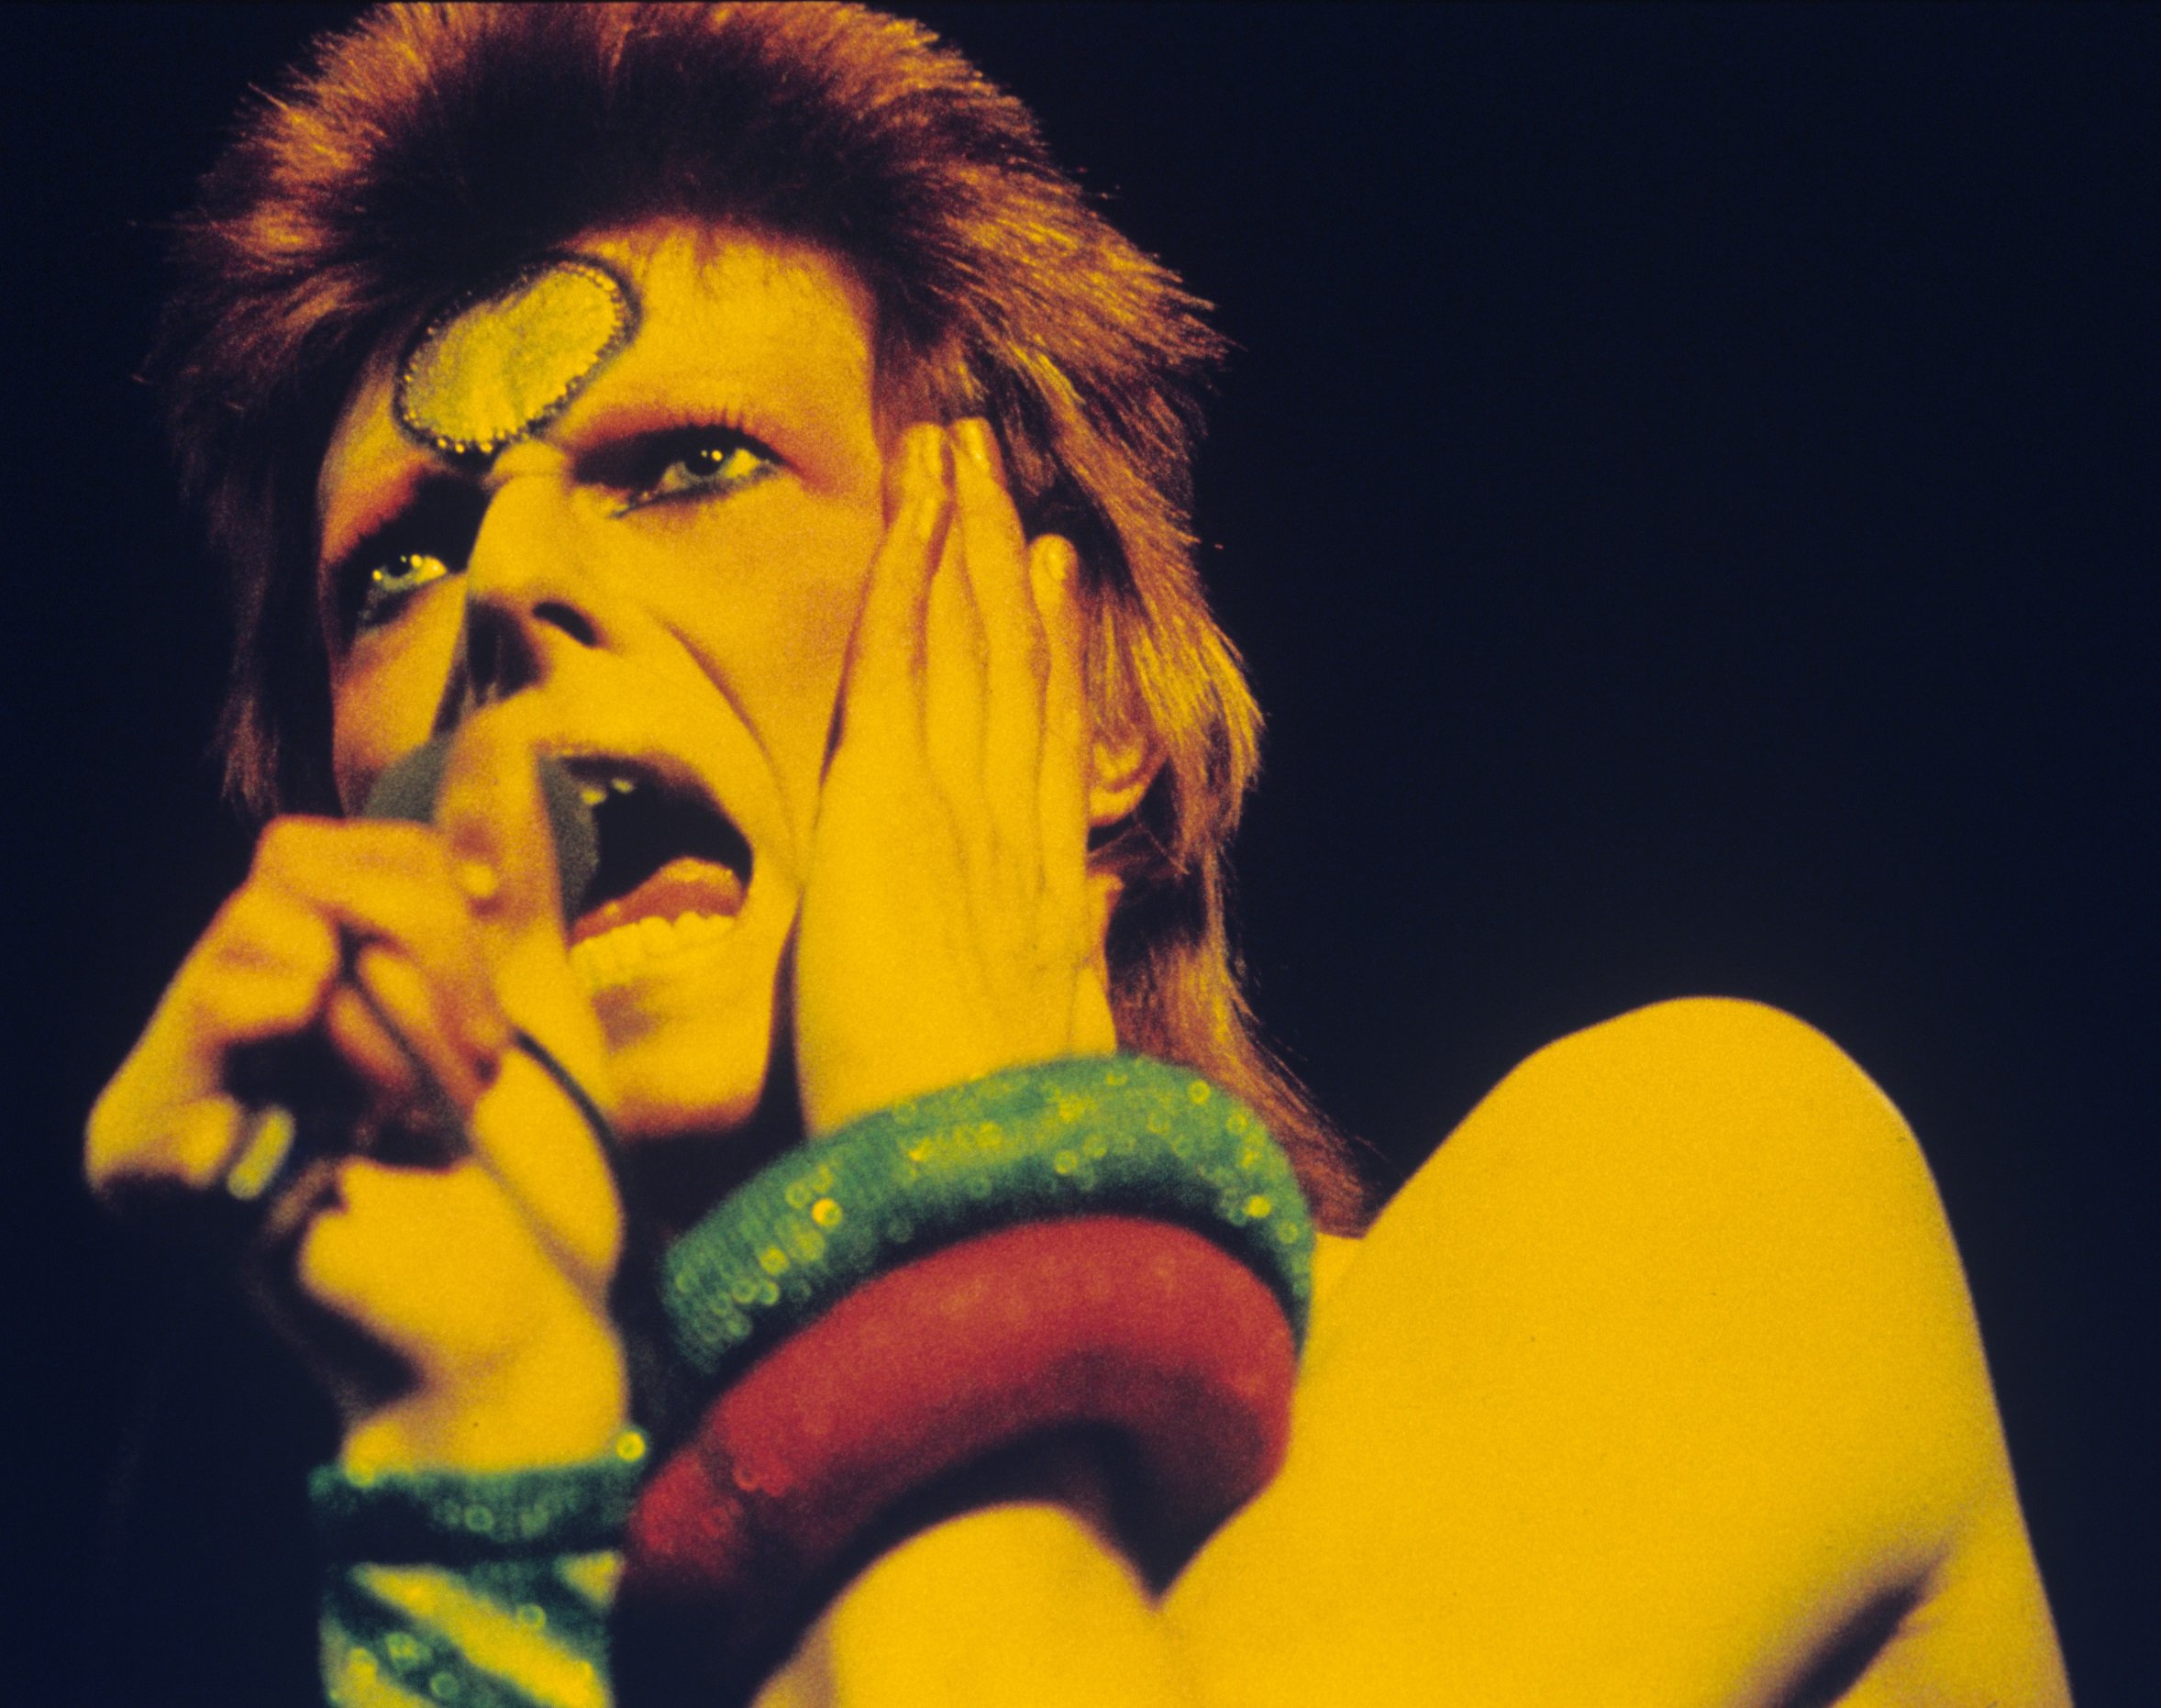 David Bowie as Ziggy Stardust holding a microphone